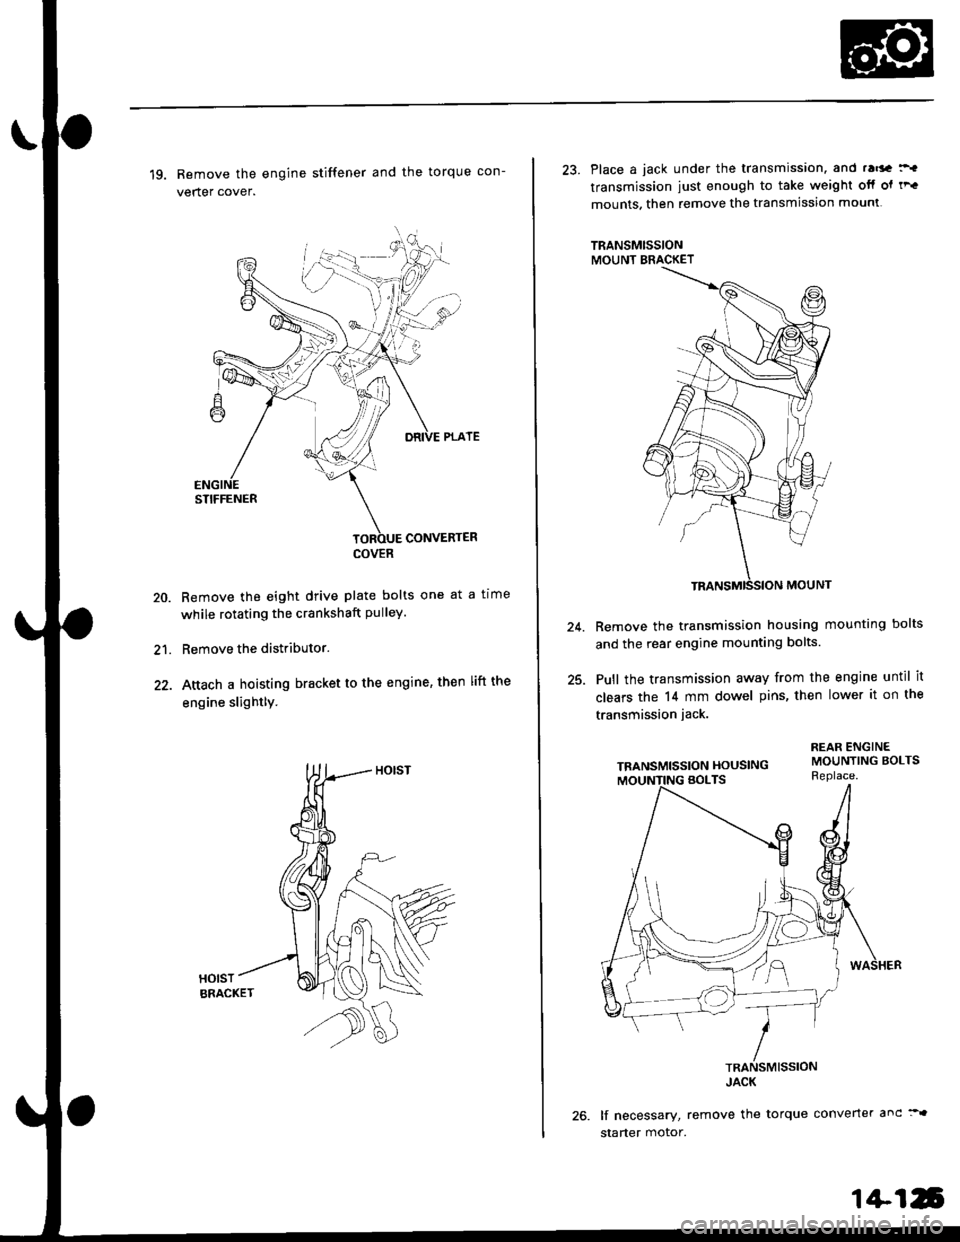 HONDA CIVIC 1997 6.G Workshop Manual 19. Remove the engine stiffener and the torque con-
verter cover.
Remove the eight drive plate bolts one at a tlme
while rotating the crankshaft pulley.
Remove the distributor.
Attach a hoisting brack